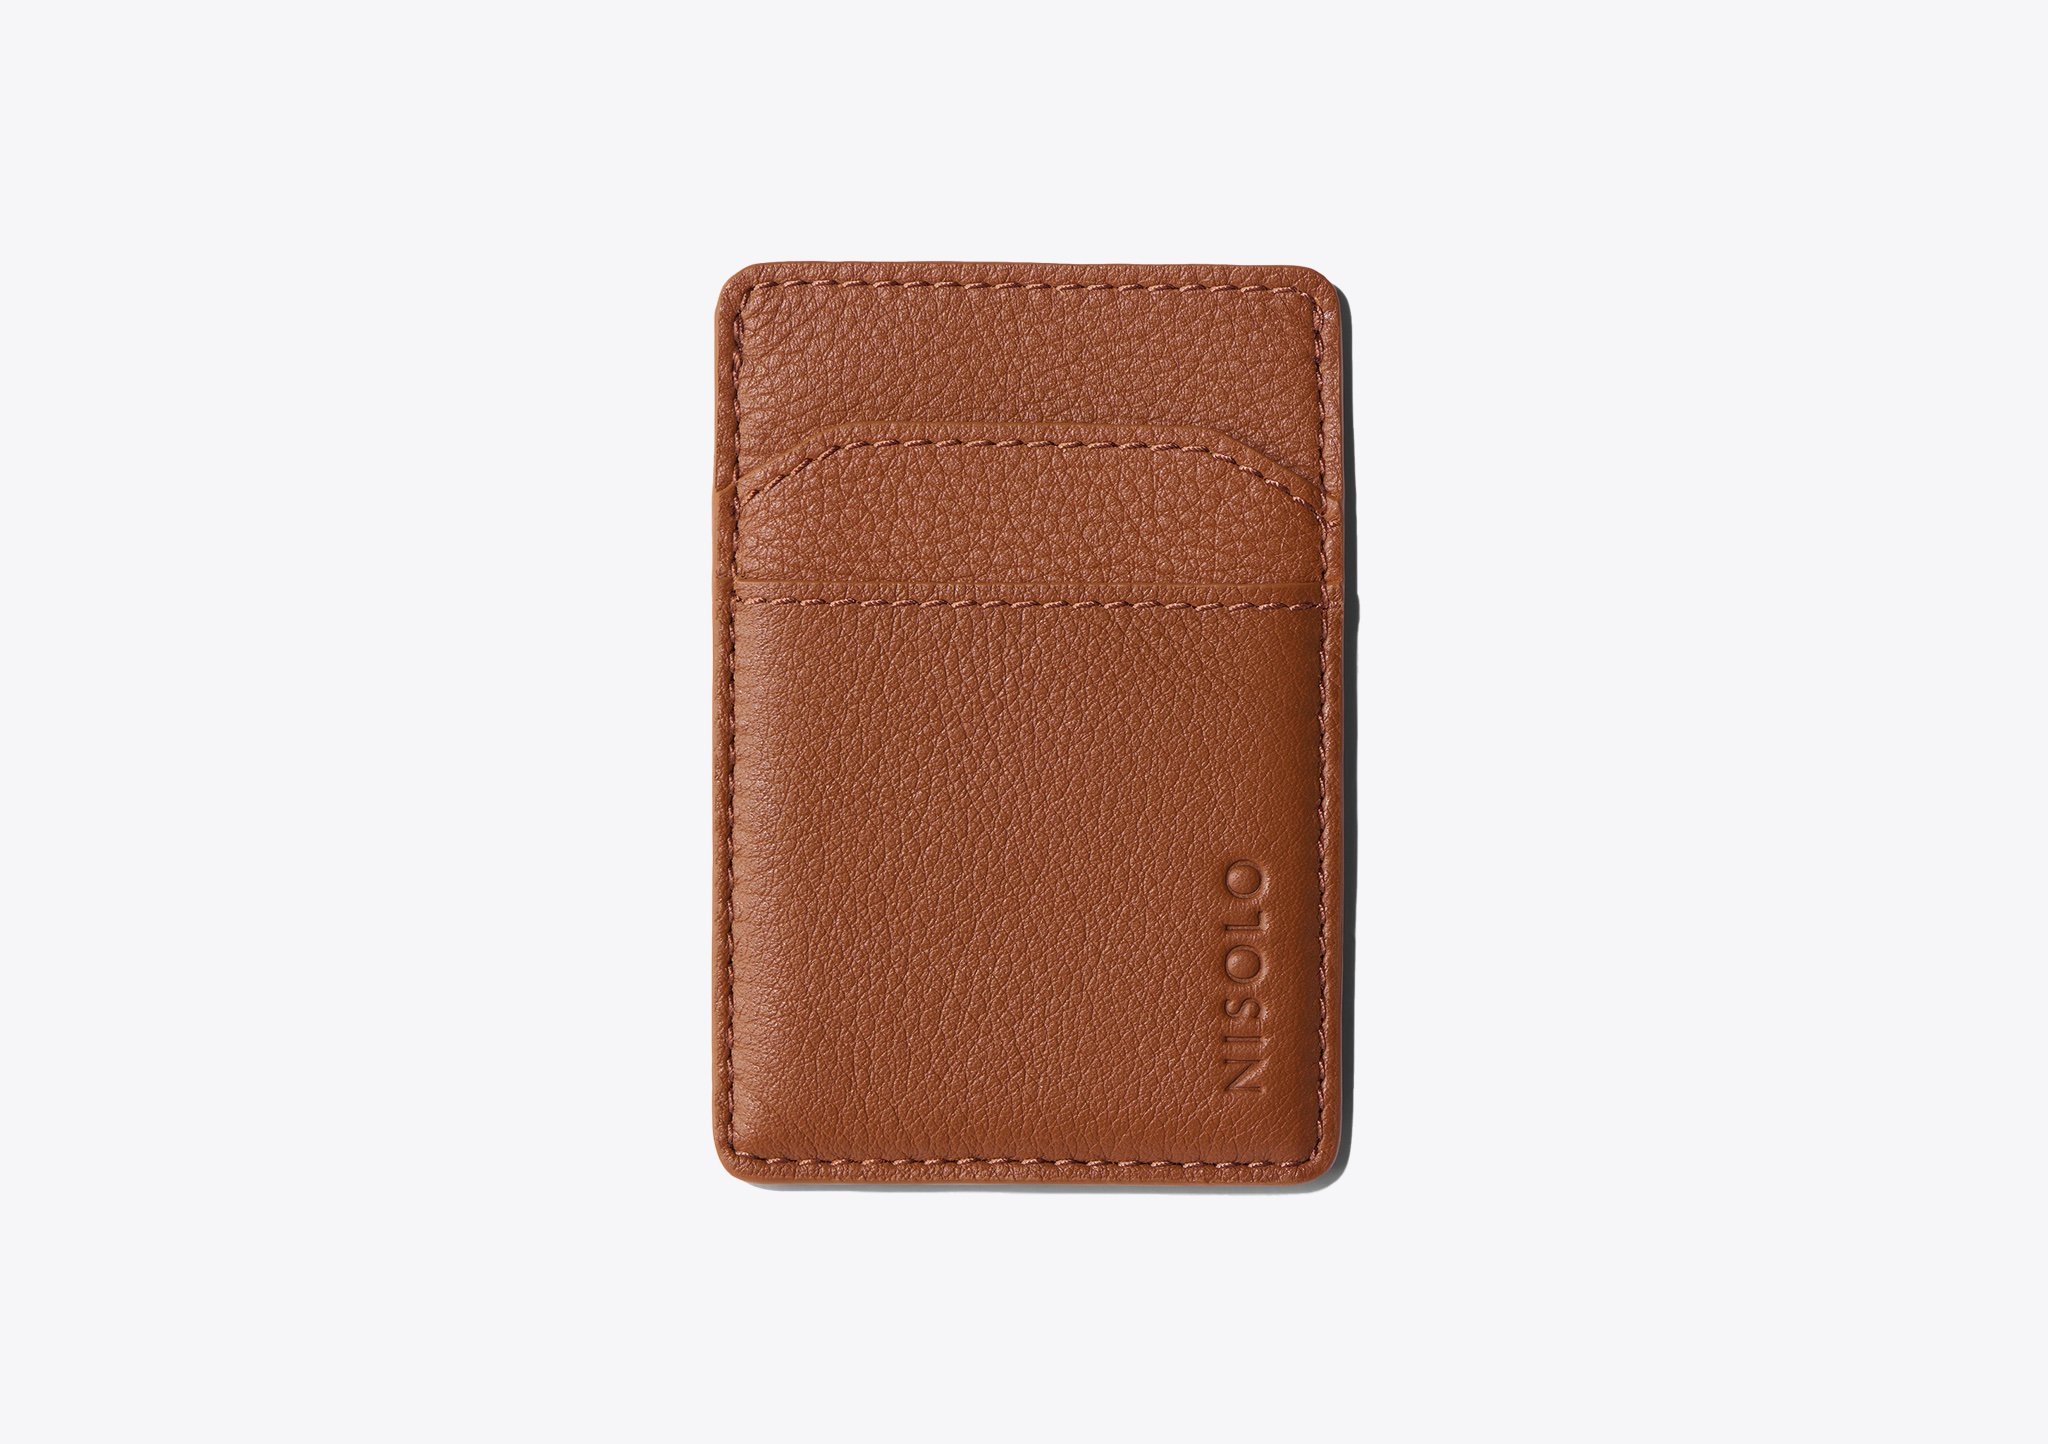 Nisolo Nico Card Case Wallet Caramel - Every Nisolo product is built on the foundation of comfort, function, and design. 